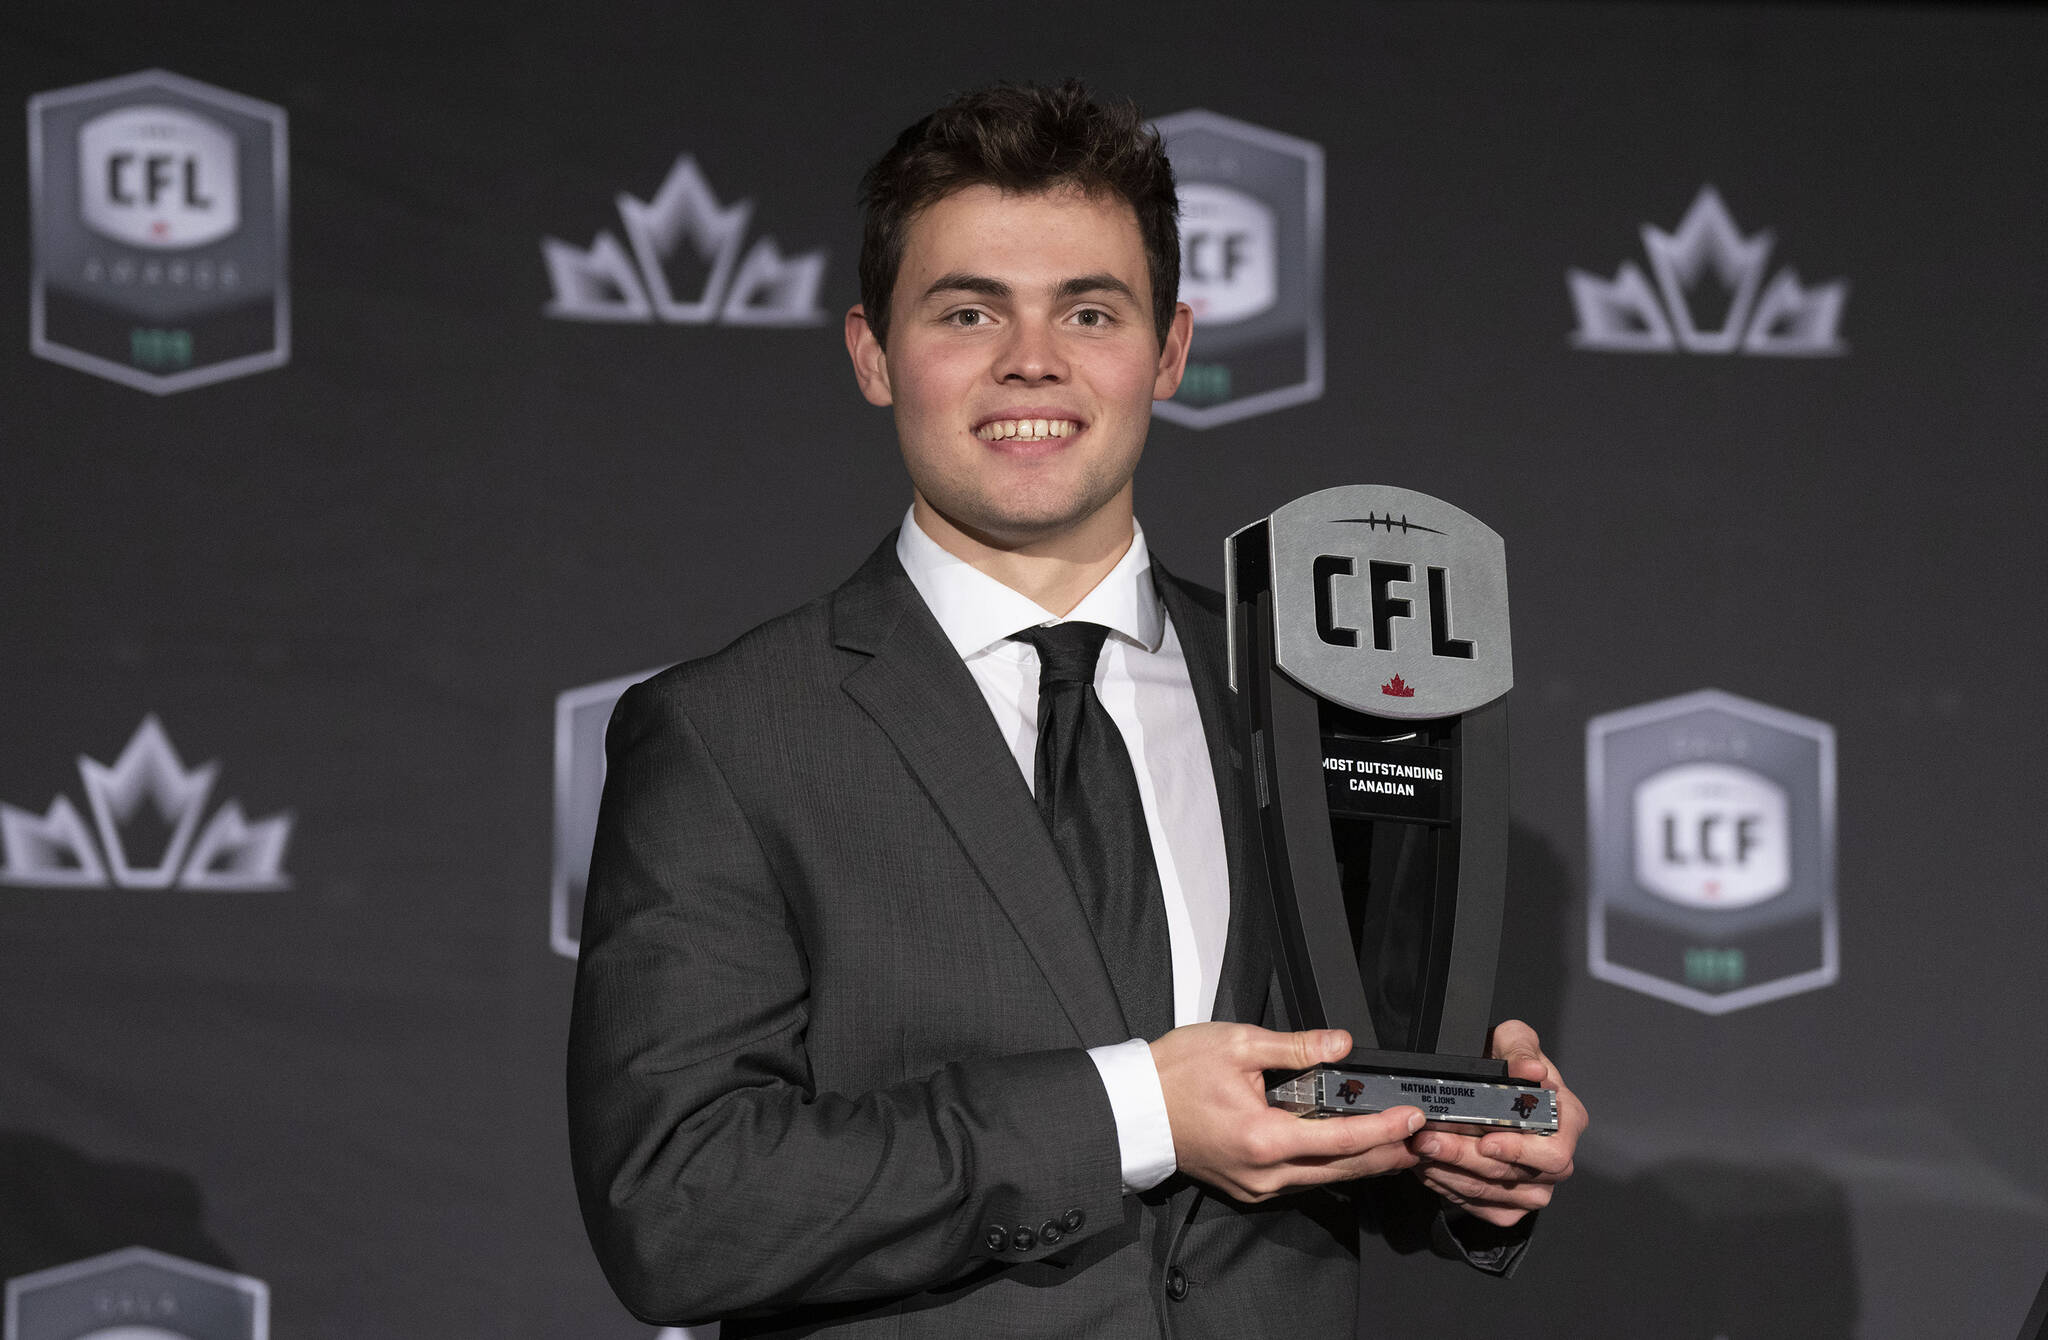 Most outstanding Canadian player, quarterback Nathan Rourke of the BC Lions, holds up his trophy during the CFL Awards in Regina, Thursday, Nov. 17, 2022. THE CANADIAN PRESS/Paul Chiasson